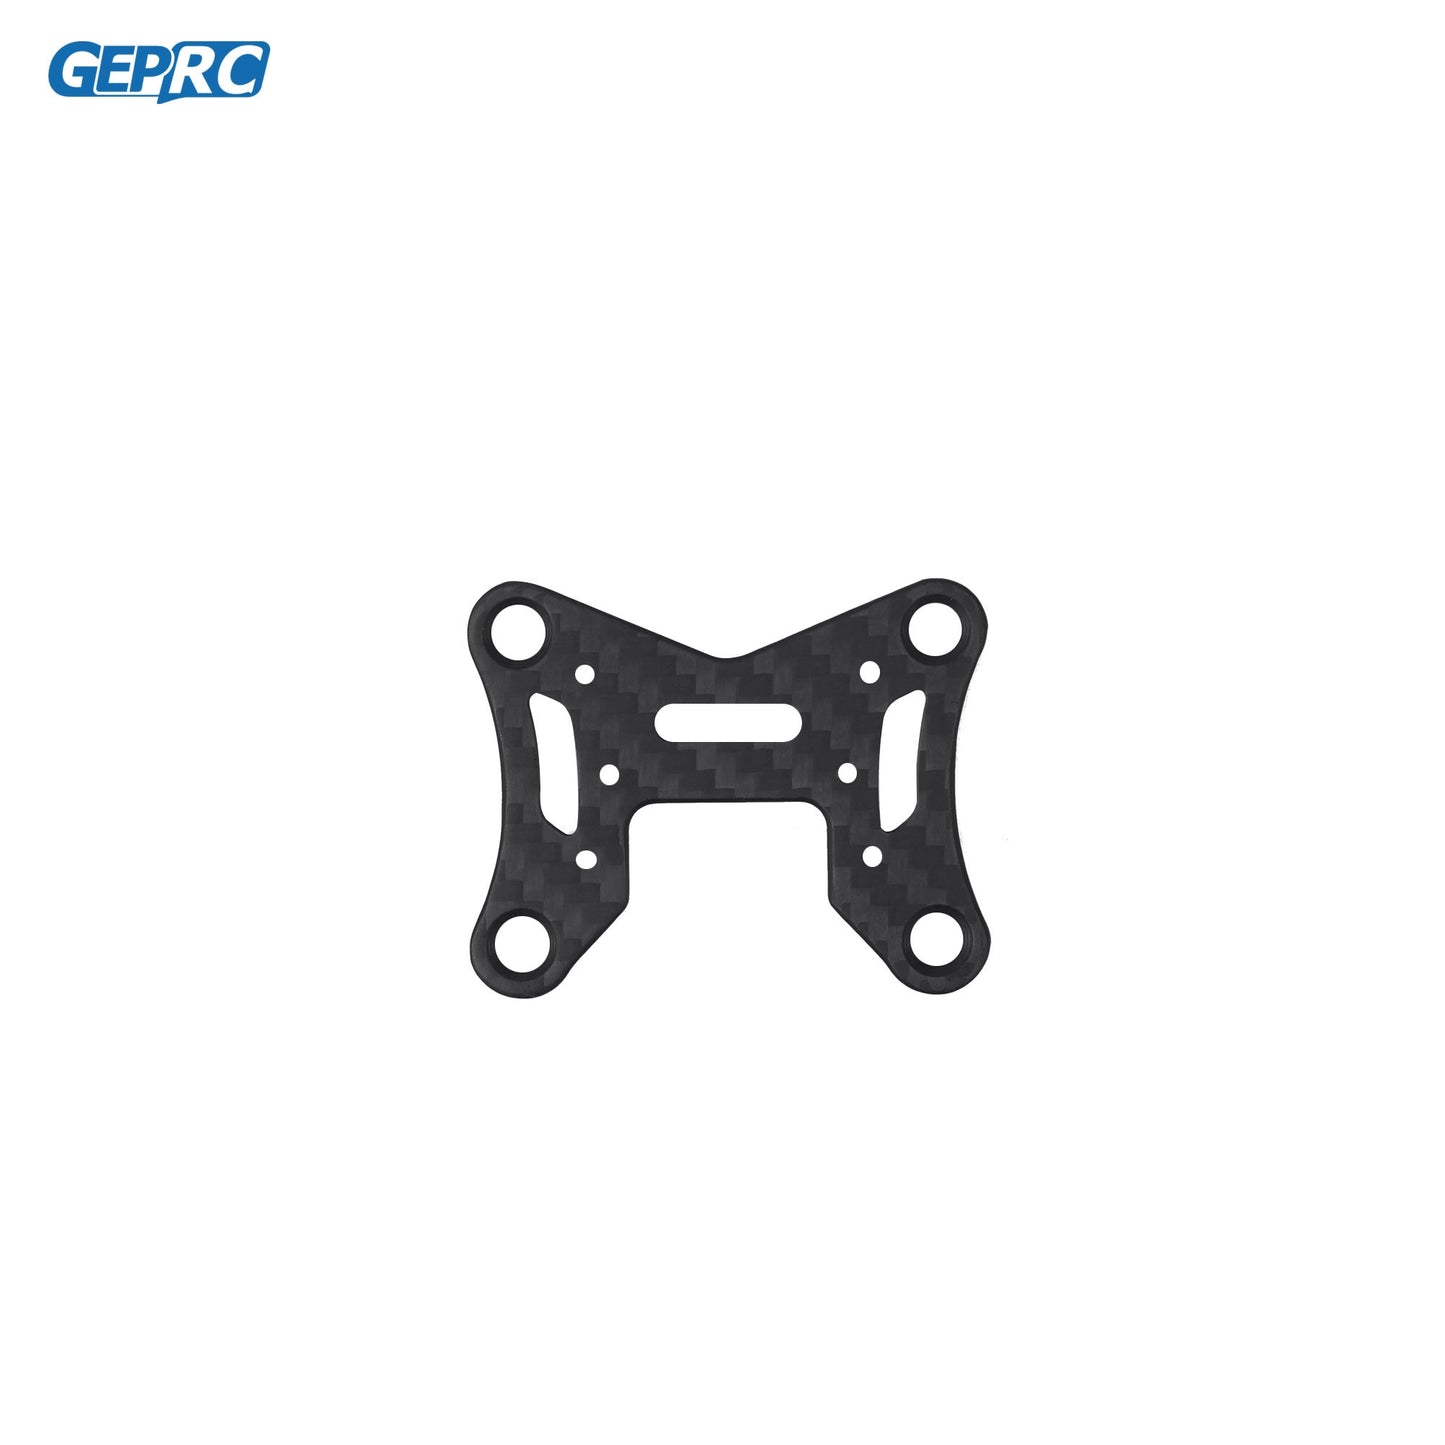 GEPRC GEP-CL35 V2 Frame - Parts for CineLog35 V2 FPV Drone RC FPV Quadcopter Racing  Drone Replacement Accessories Parts